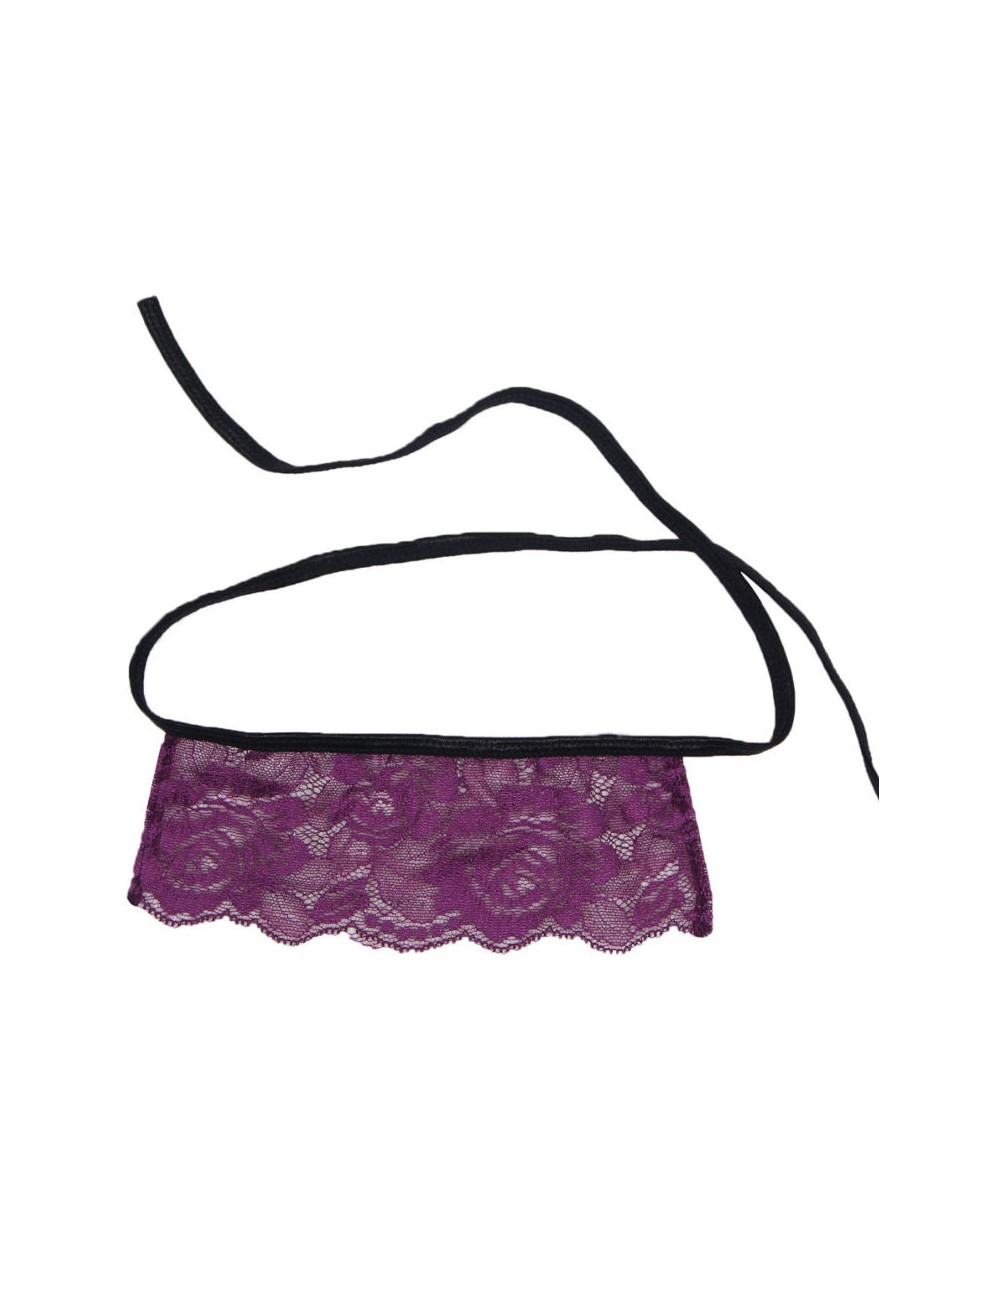 SUBBLIME CORSET THONG AND BLINDFOLD BLACK AND PURPLE S/M